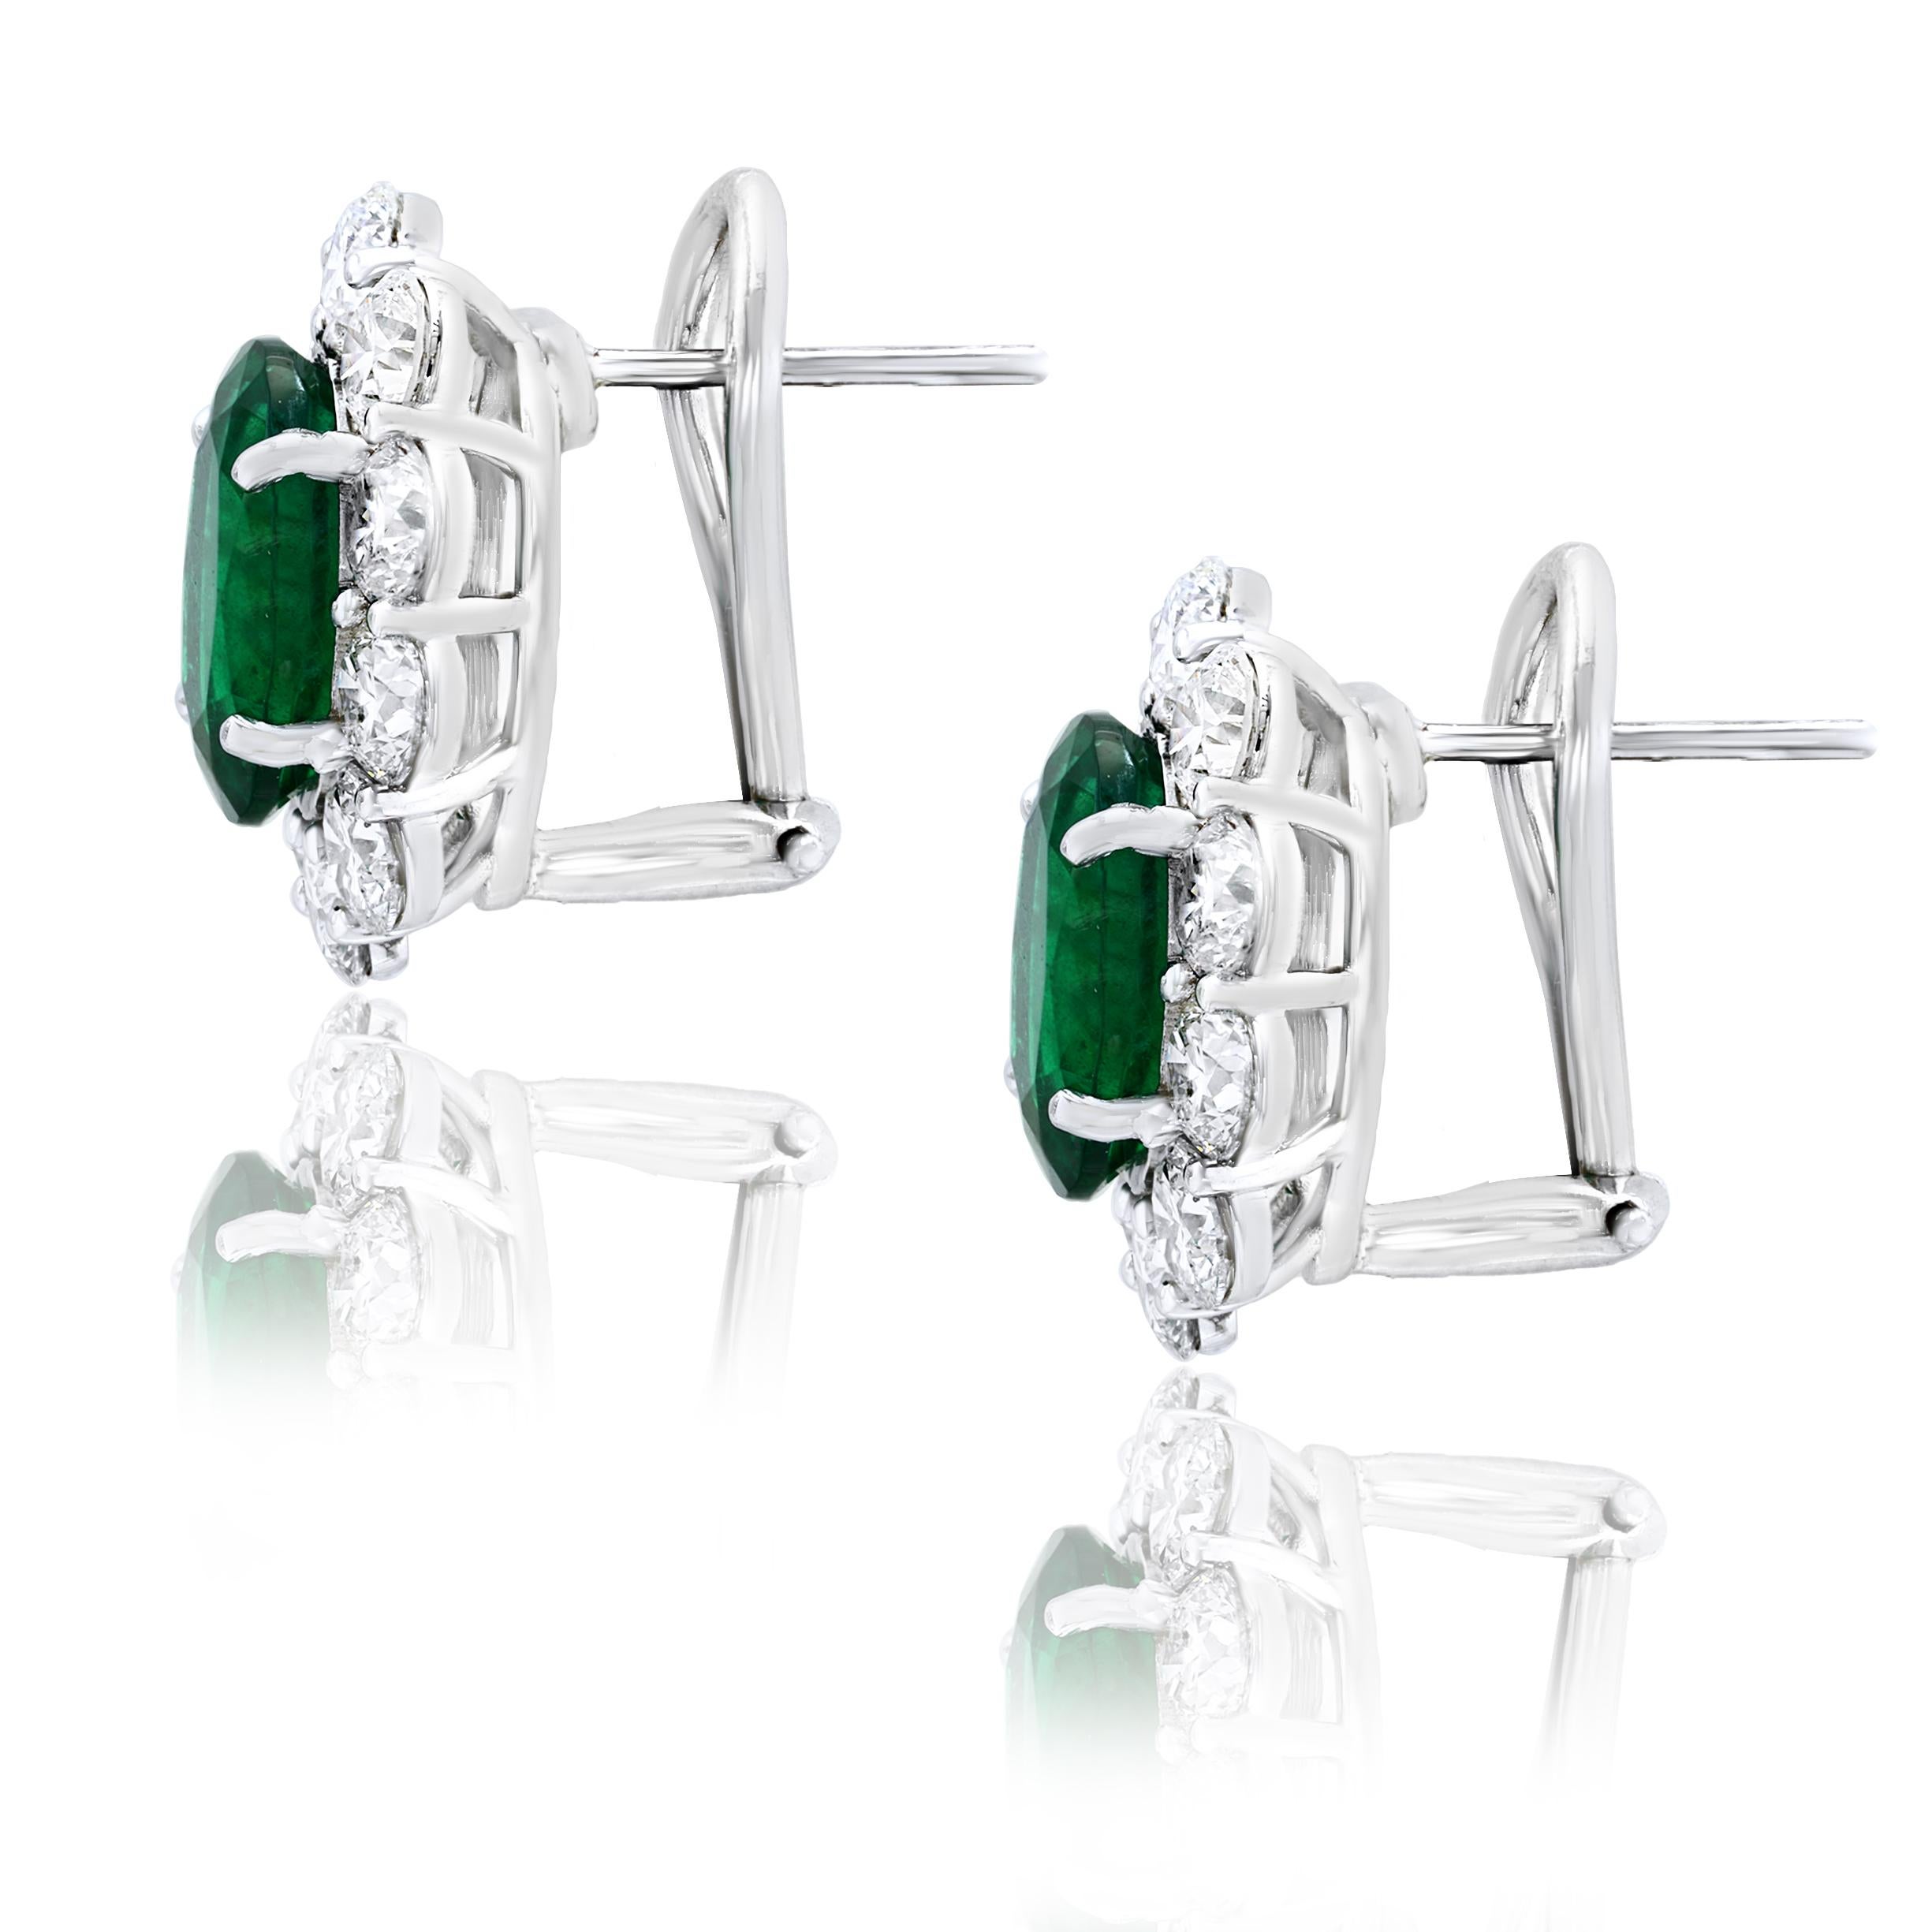 Modern 5.13 Carat Oval Cut Emerald and Diamond Halo Earrings in 18K White Gold For Sale